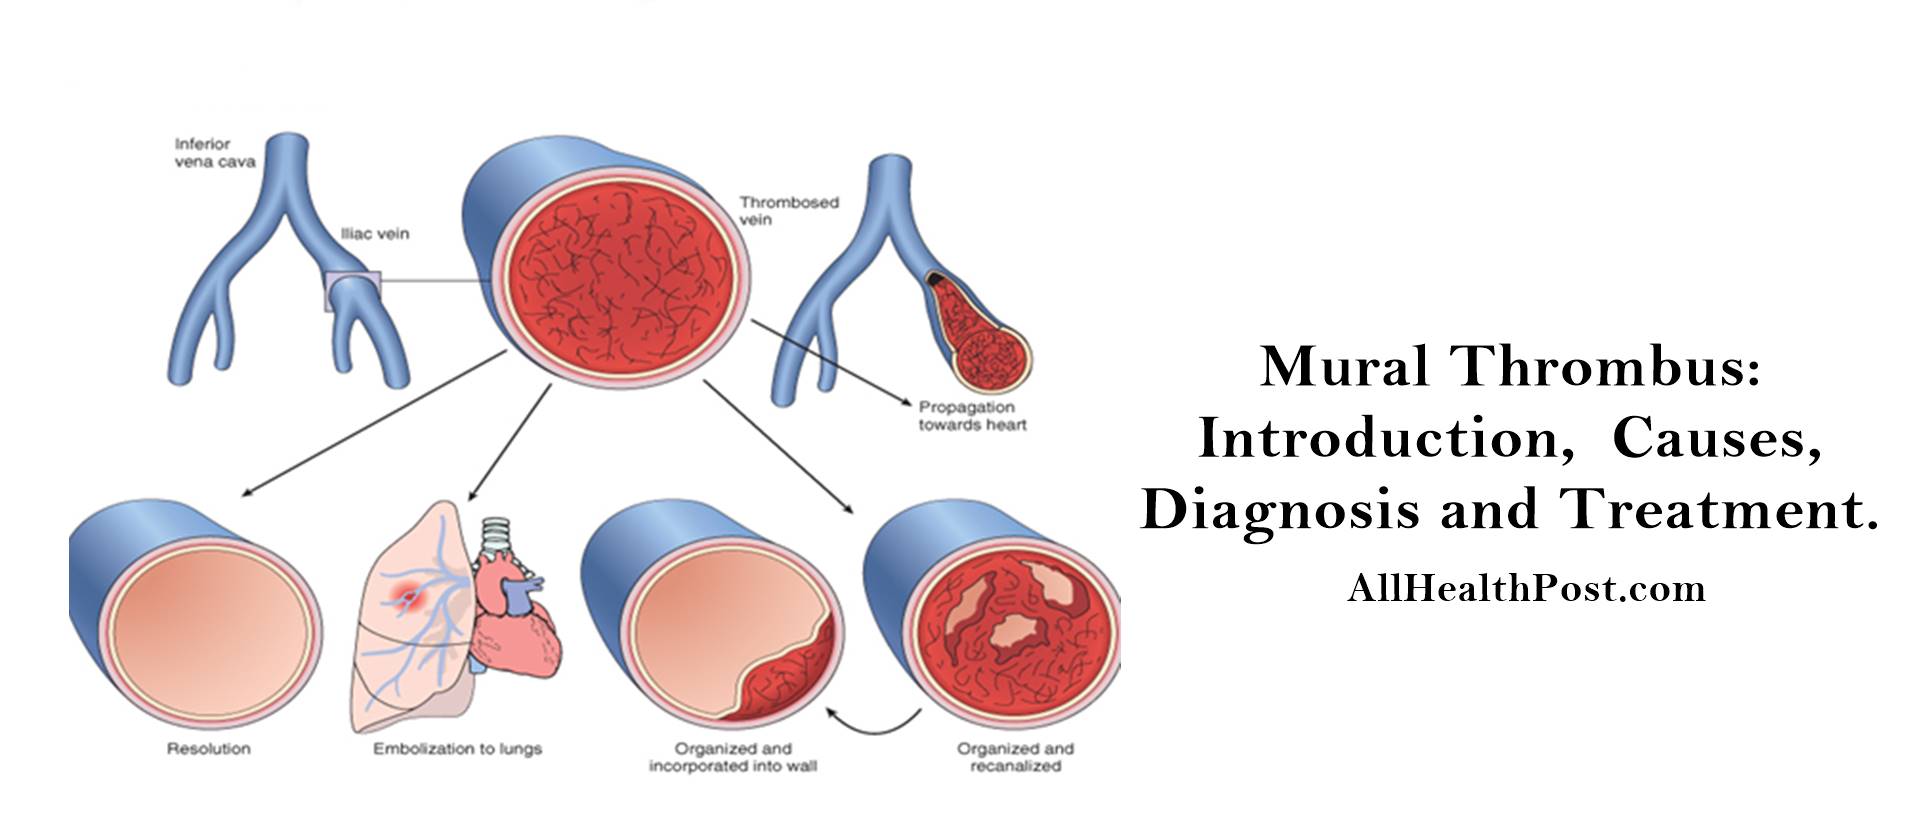 mural thrombus Introduction, Causes, Diagnosis, Treatment, Conclusion